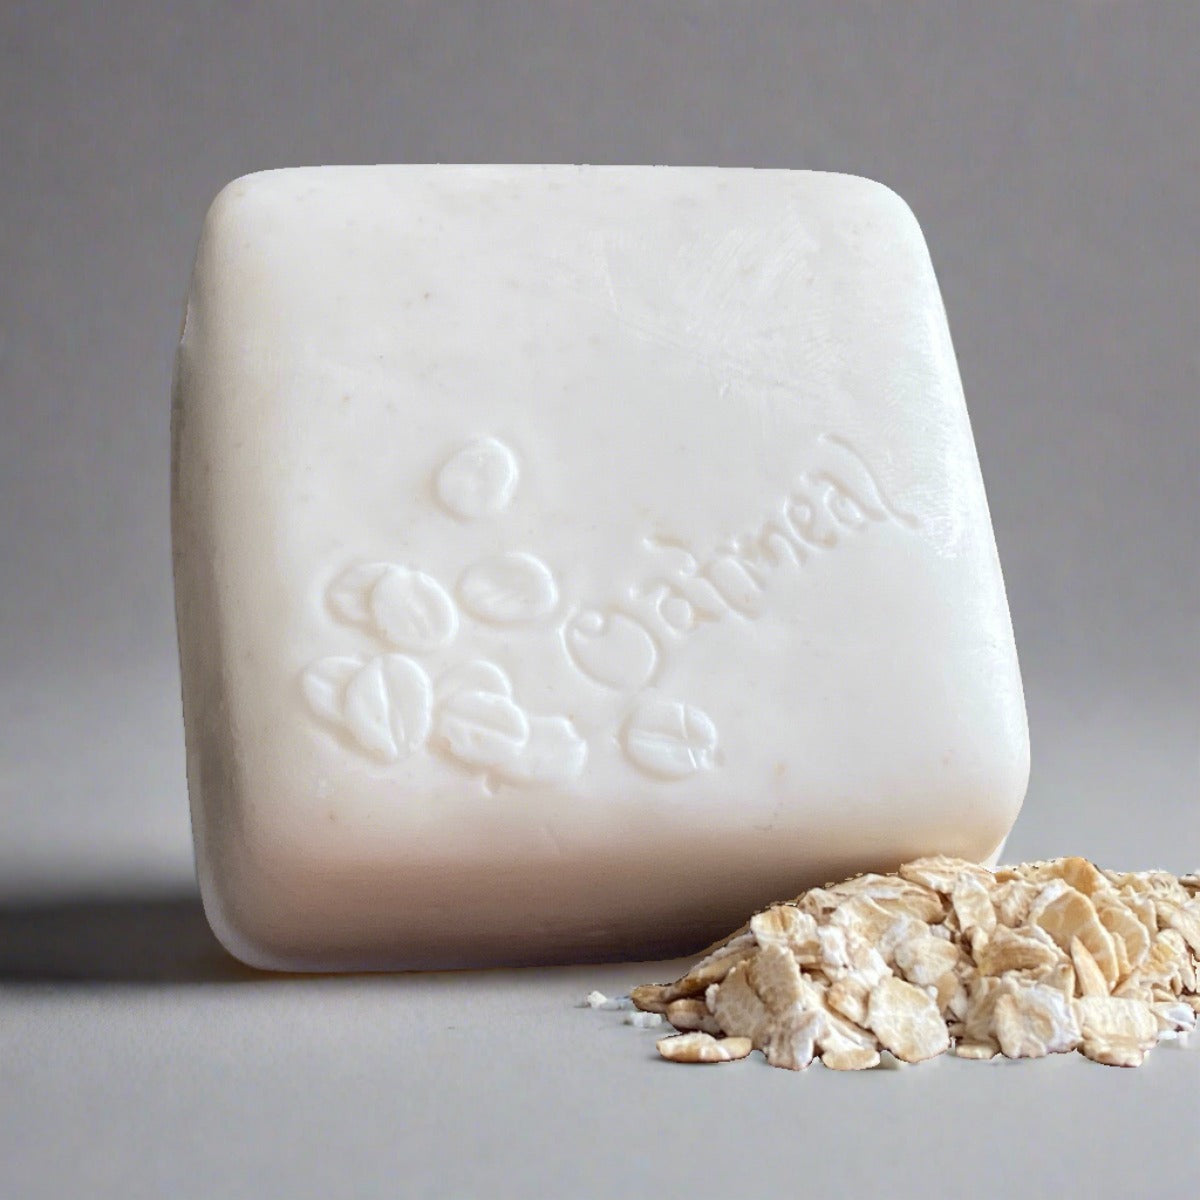 Natural, Vegan Oatmeal Soap to protect against free radicals